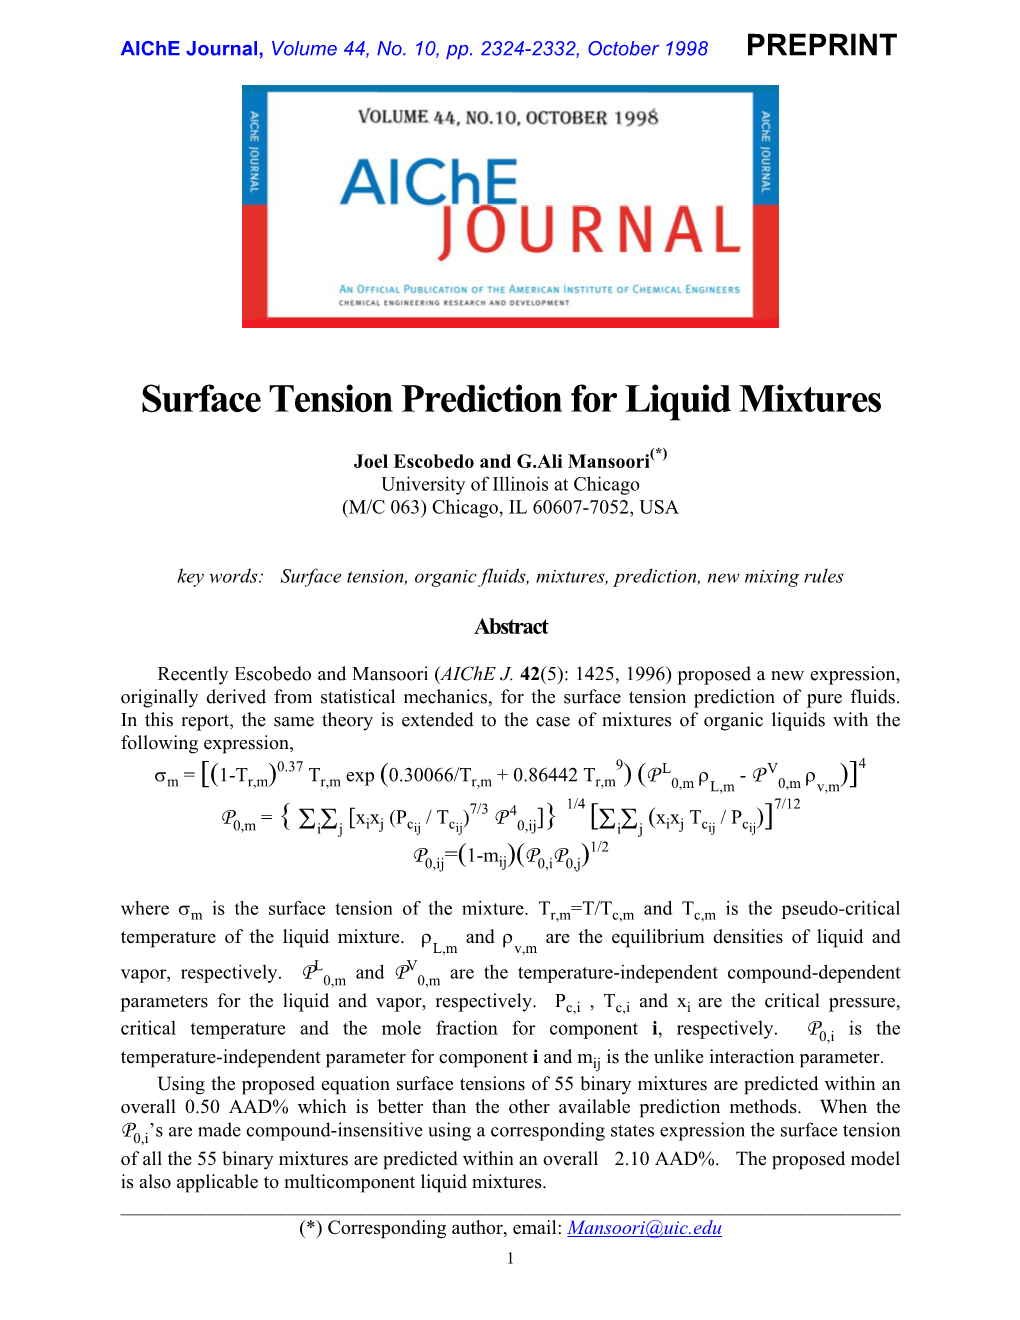 Surface Tension Prediction for Liquid Mixtures